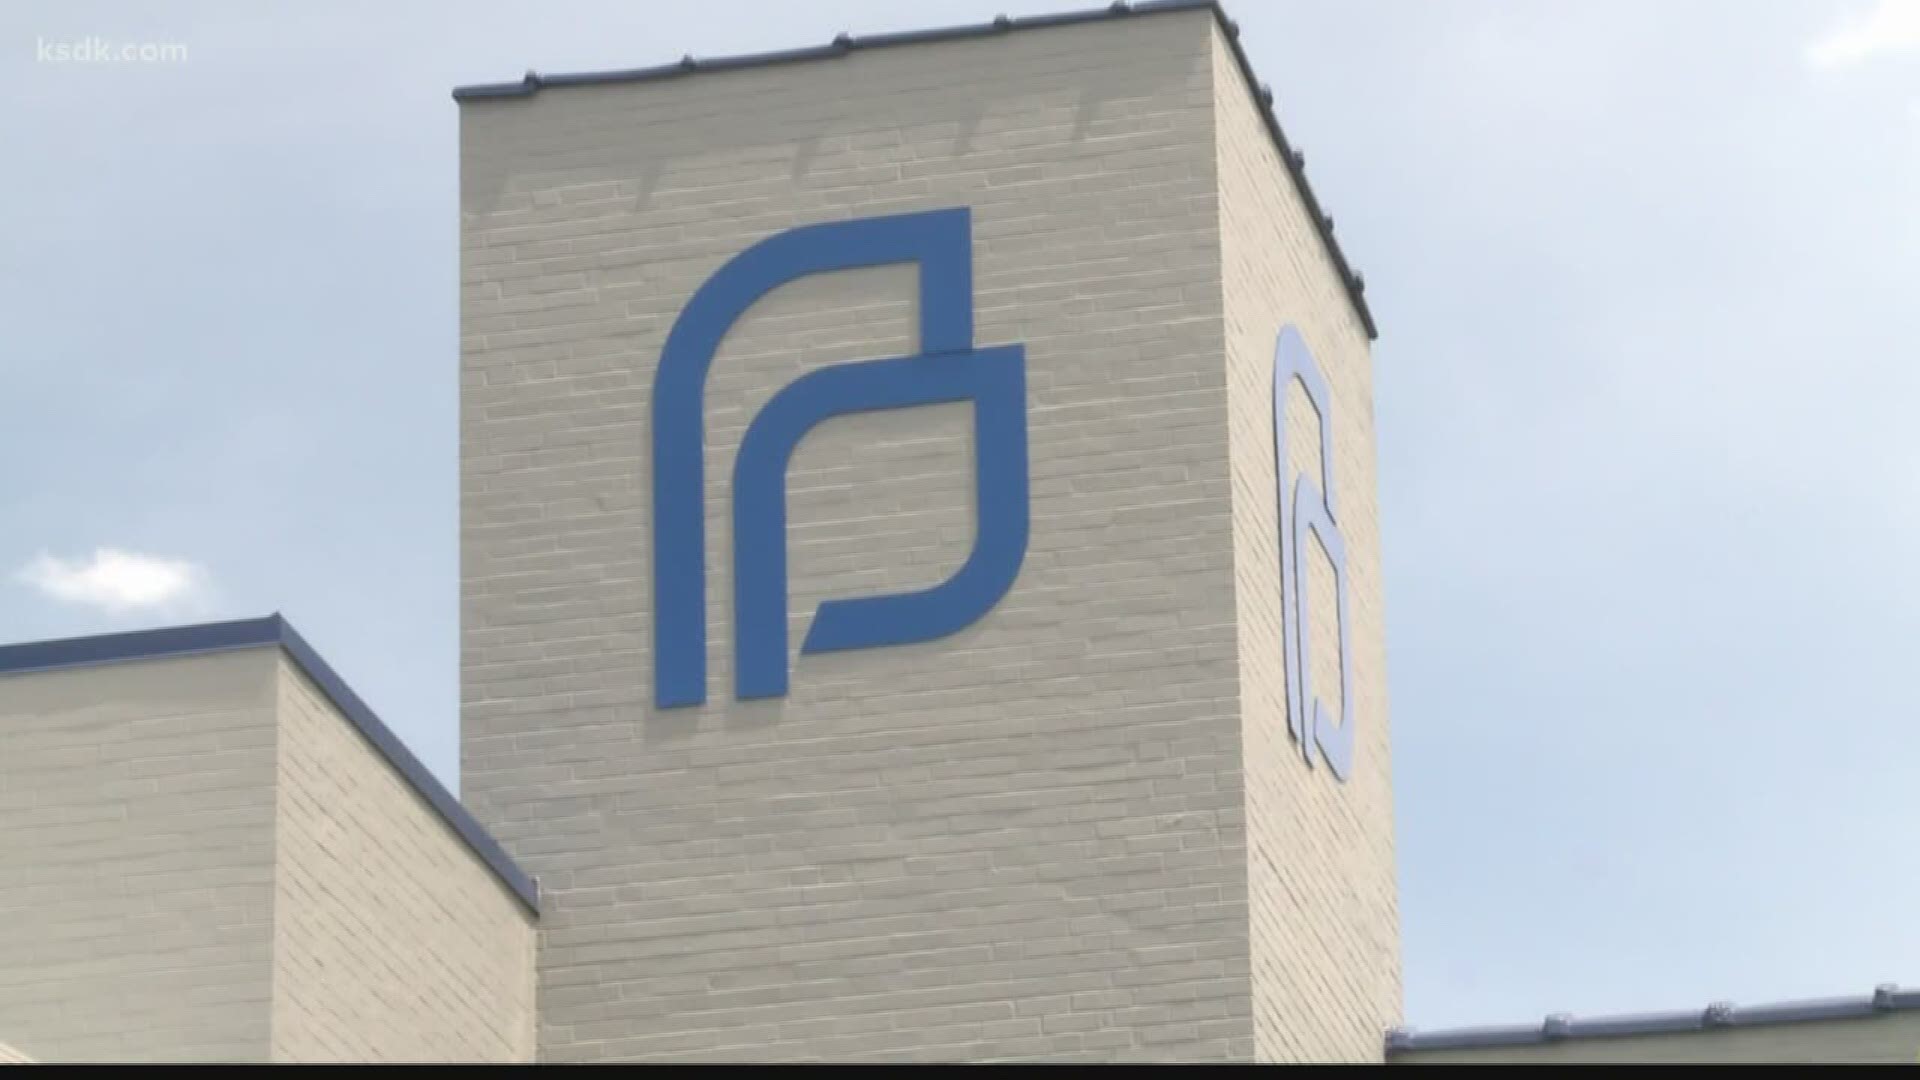 Planned Parenthood and the ACLU are joining a list of other states suing their elected officials over the right to legally perform abortions.